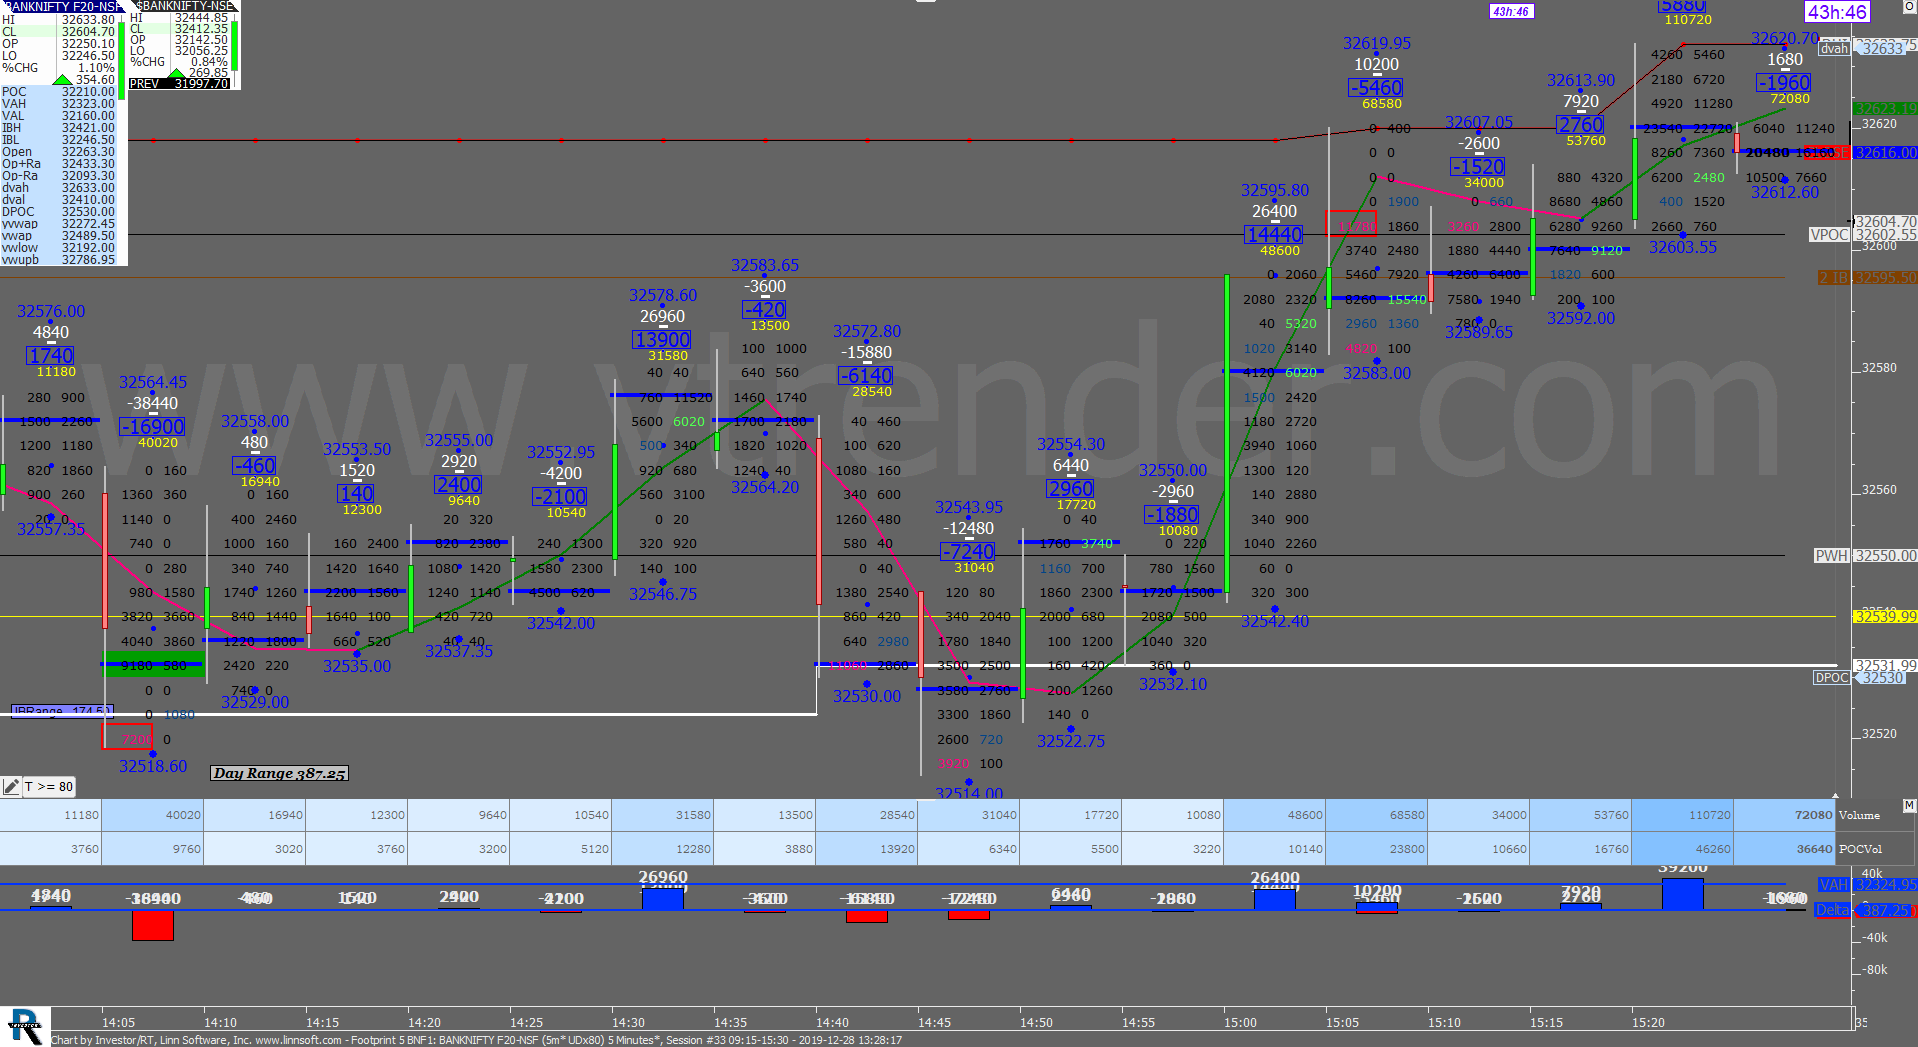 5 31 Order Flow Charts Dated 27Th Dec (5 Mins) Banknifty Futures, Day Trading, Intraday Trading, Intraday Trading Strategies, Nifty Futures, Order Flow Analysis, Support And Resistance, Trading Strategies, Volume Profile Trading